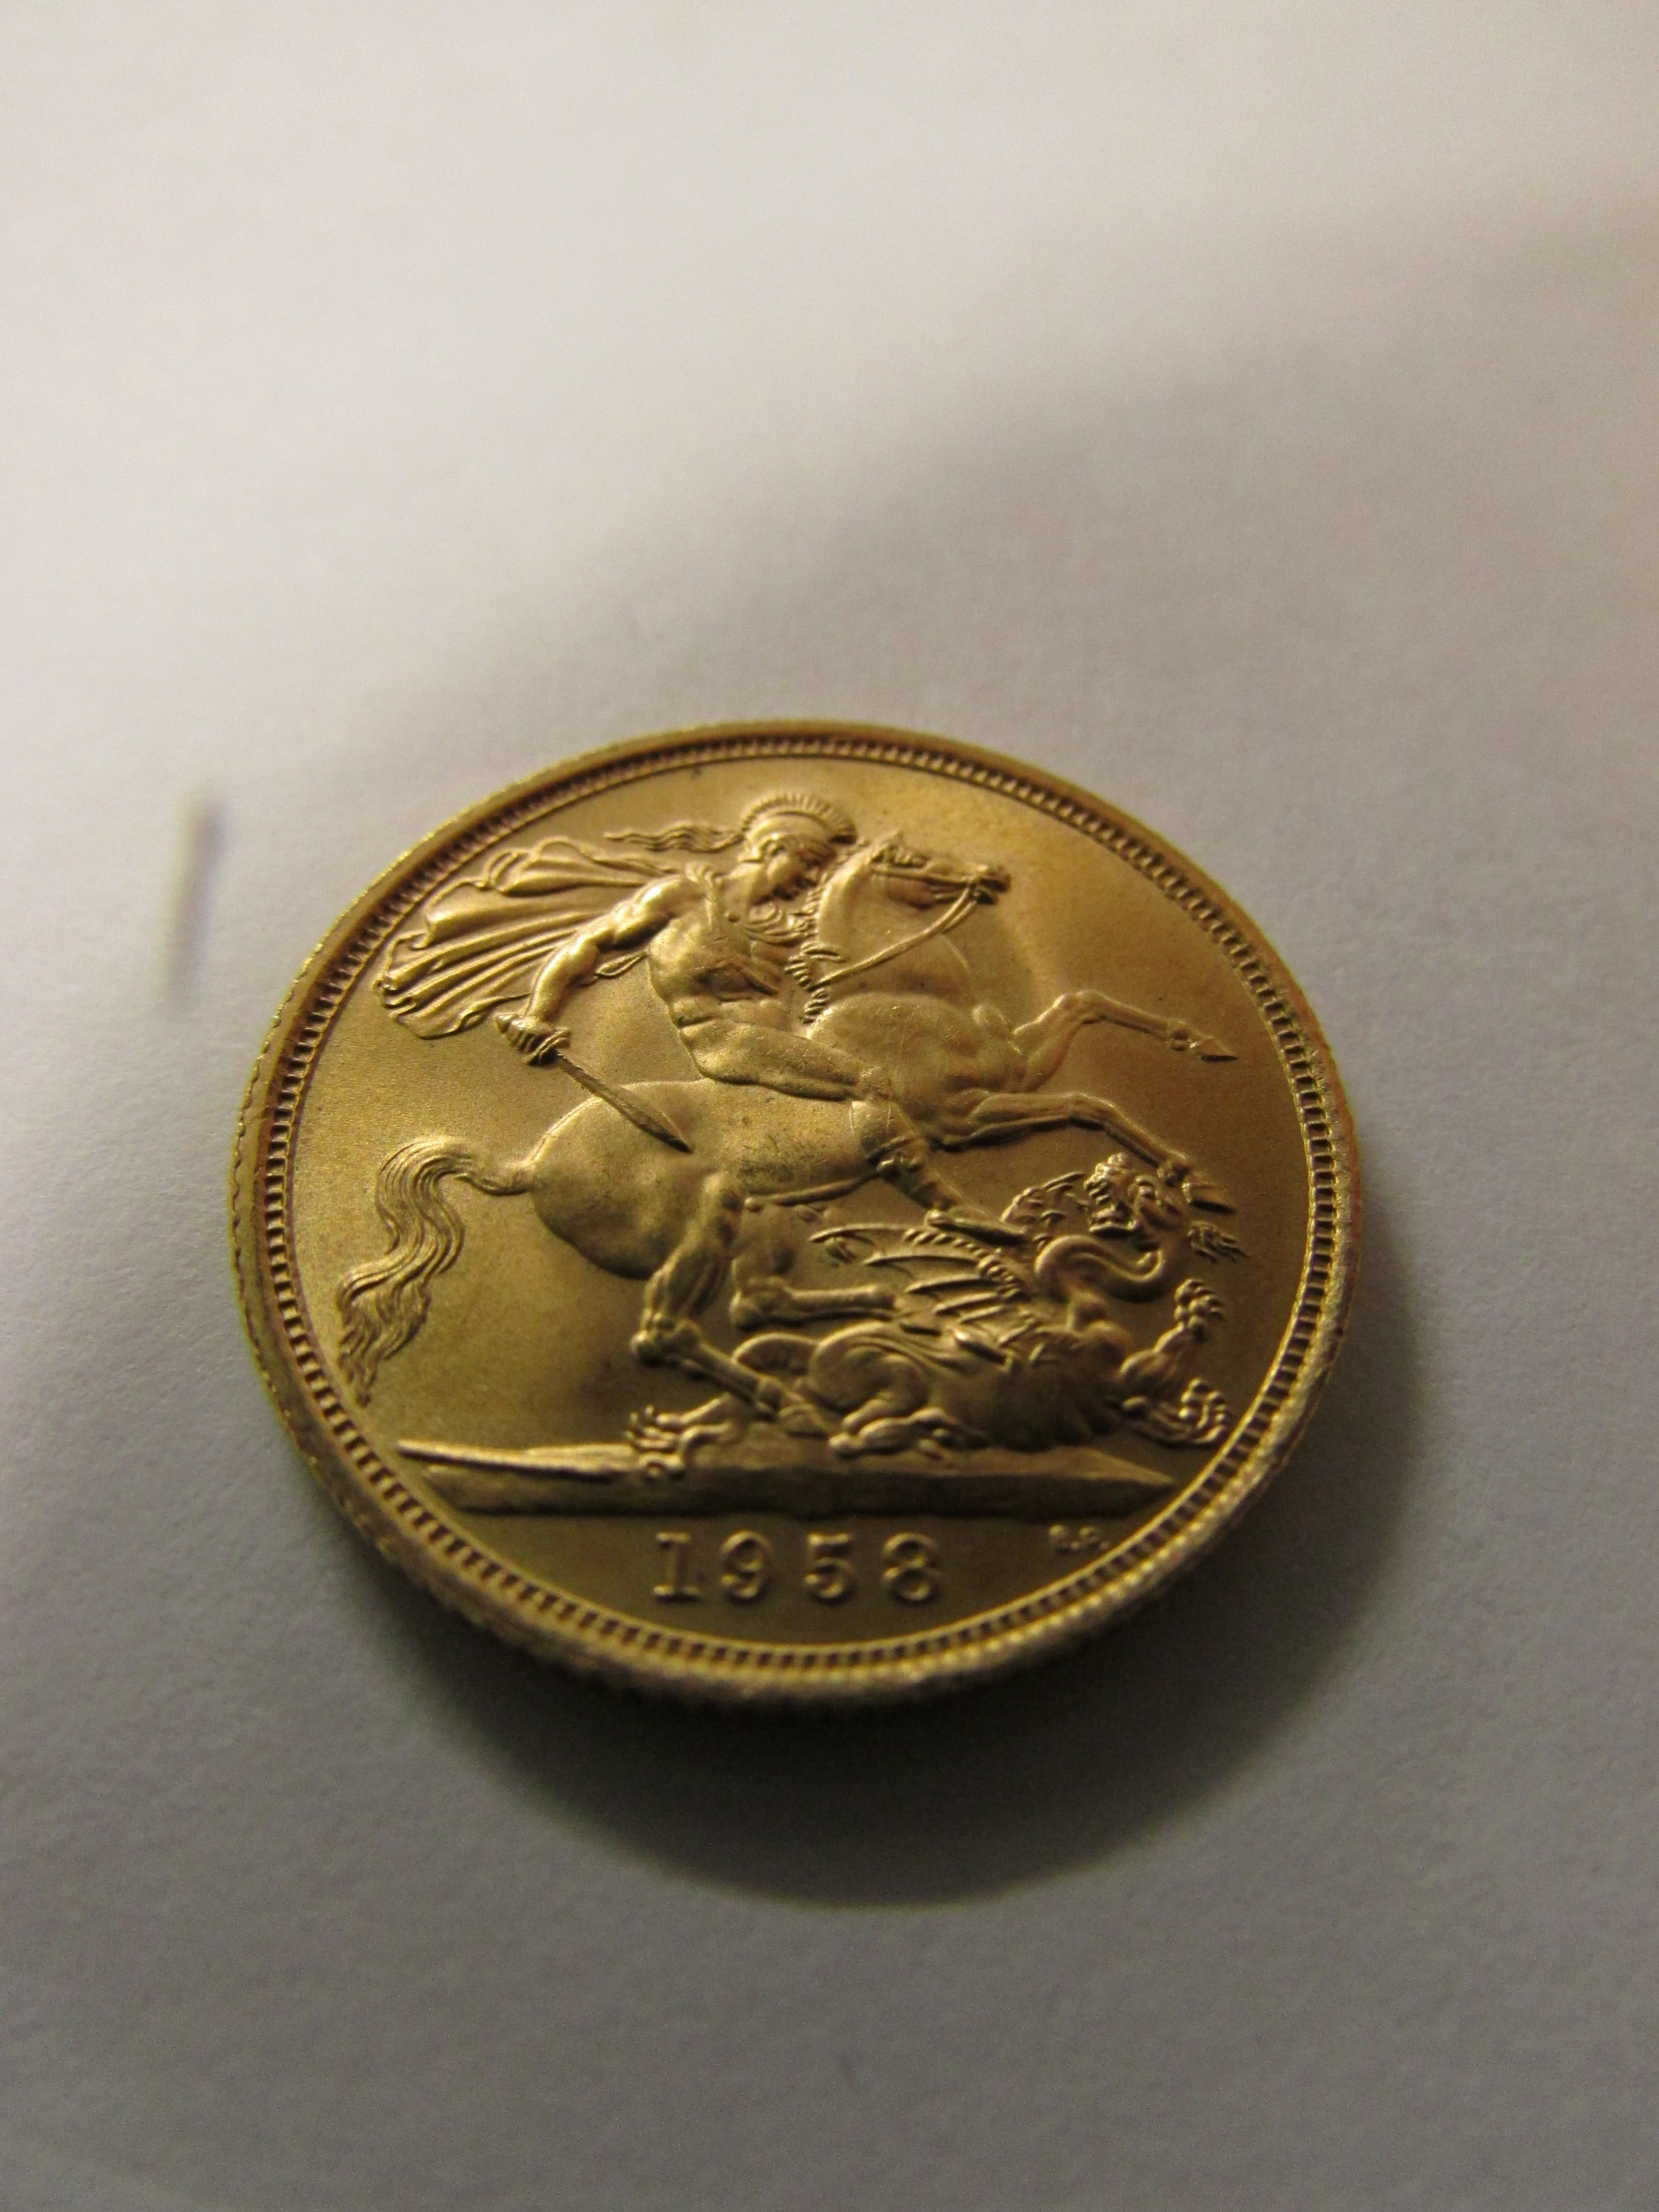 1958 gold sovereign - Image 2 of 3